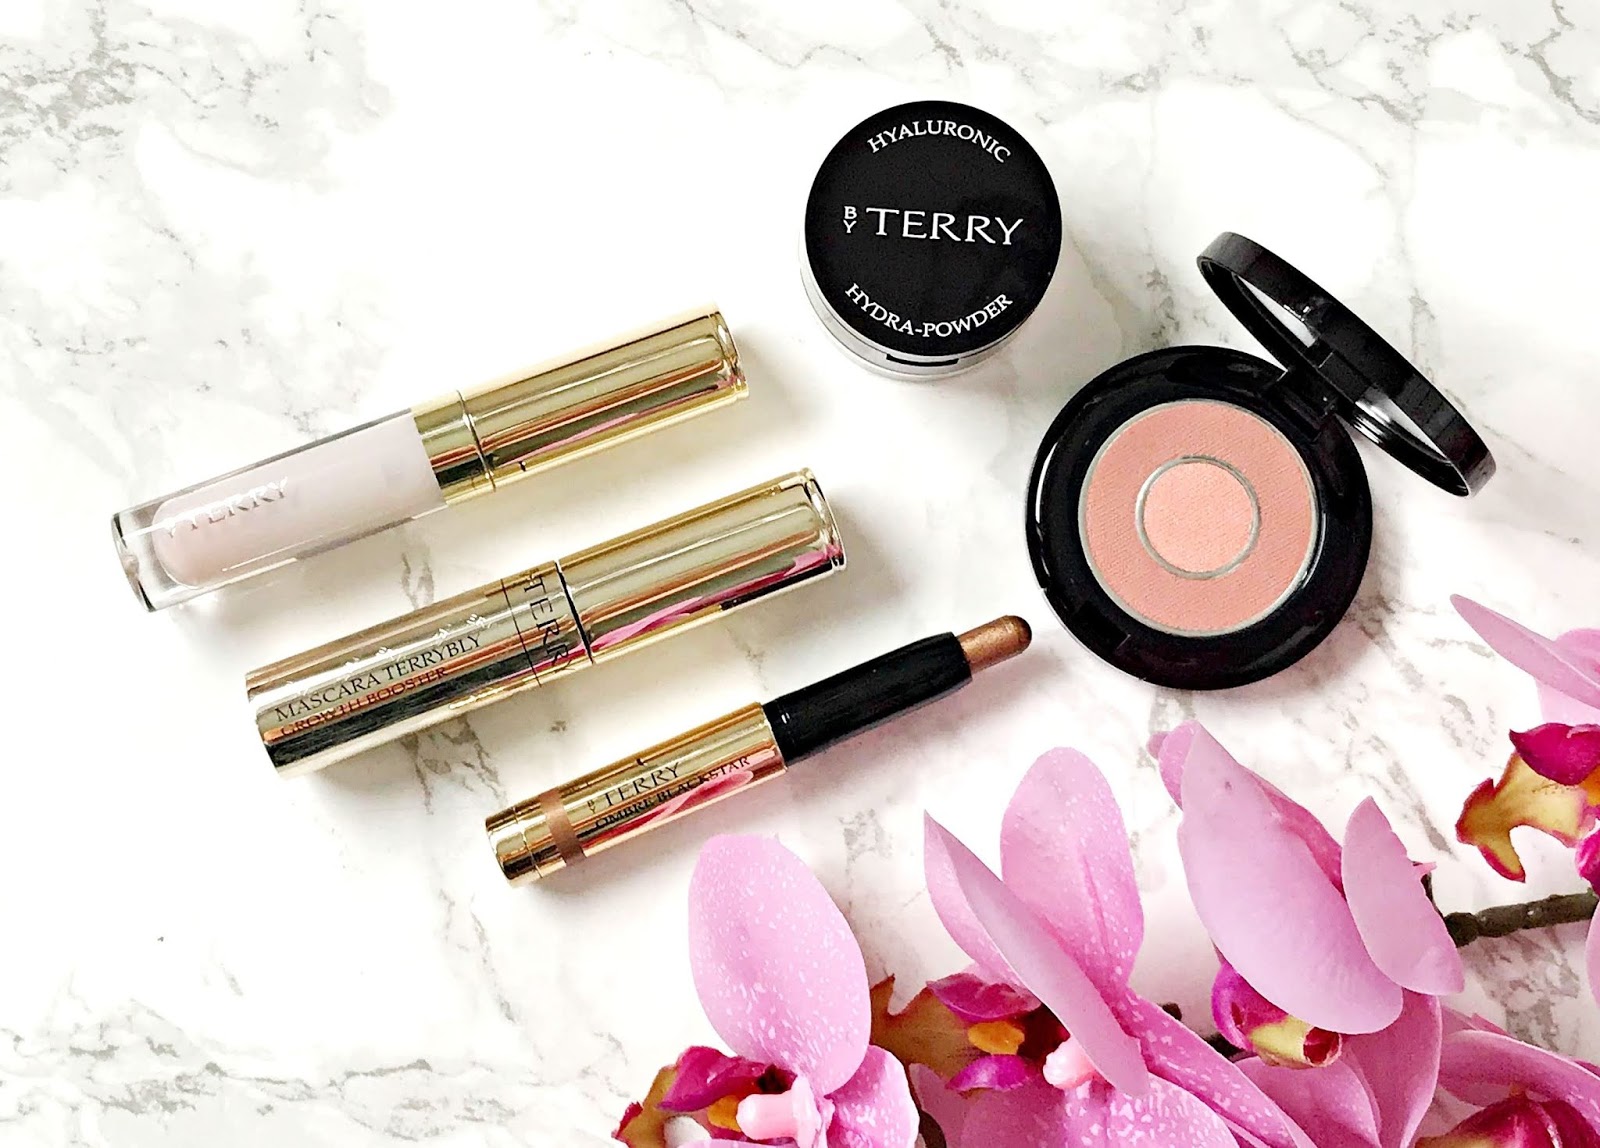 By Terry My Beauty Favourites Set - A World Duty Free Exclusive